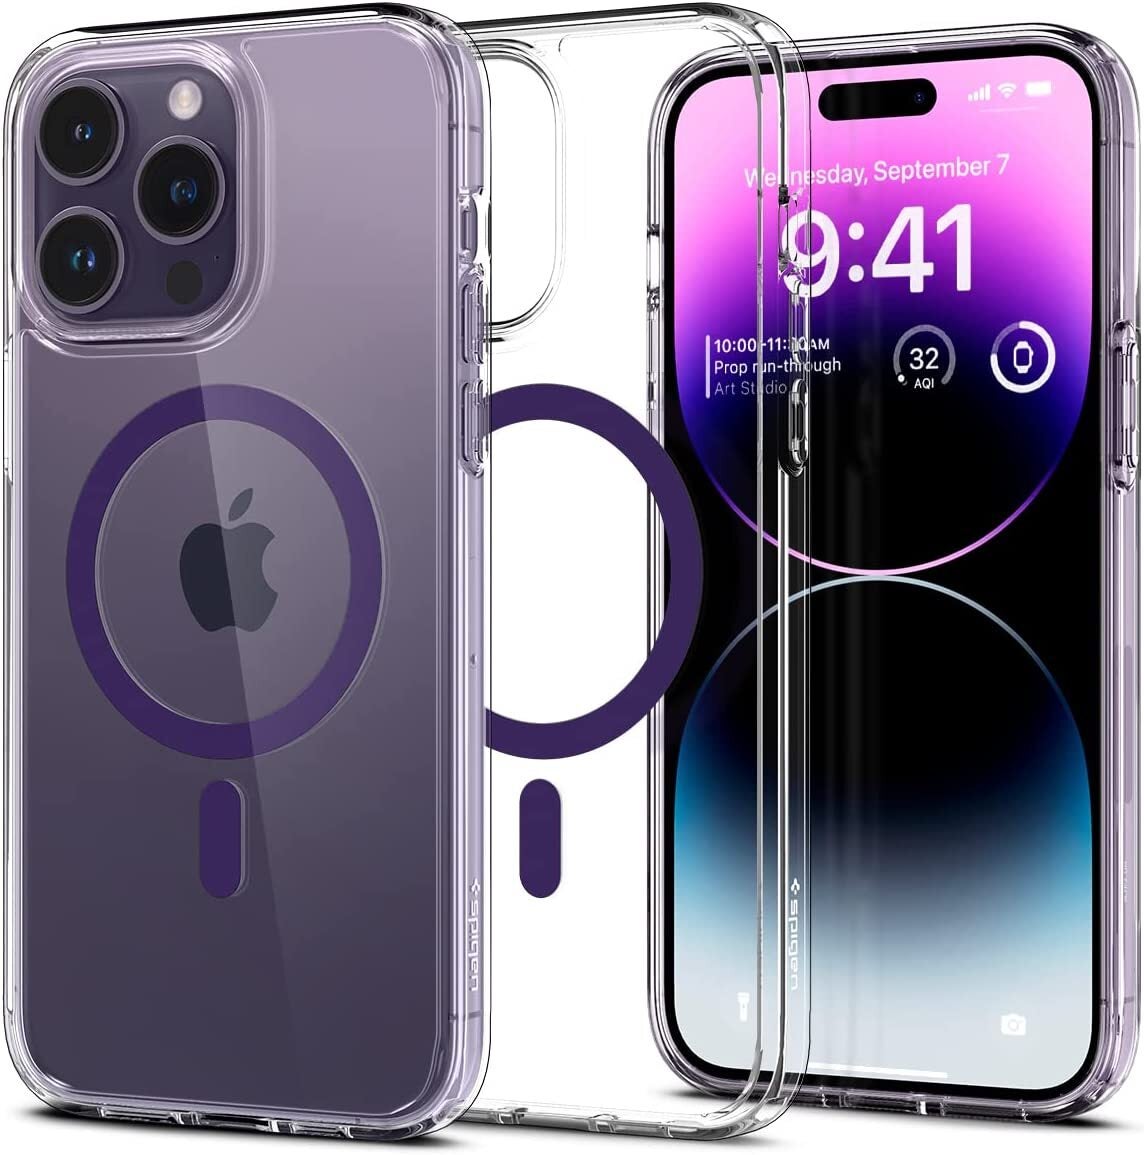 The Best iPhone 12 Pro Max Cases in 2023